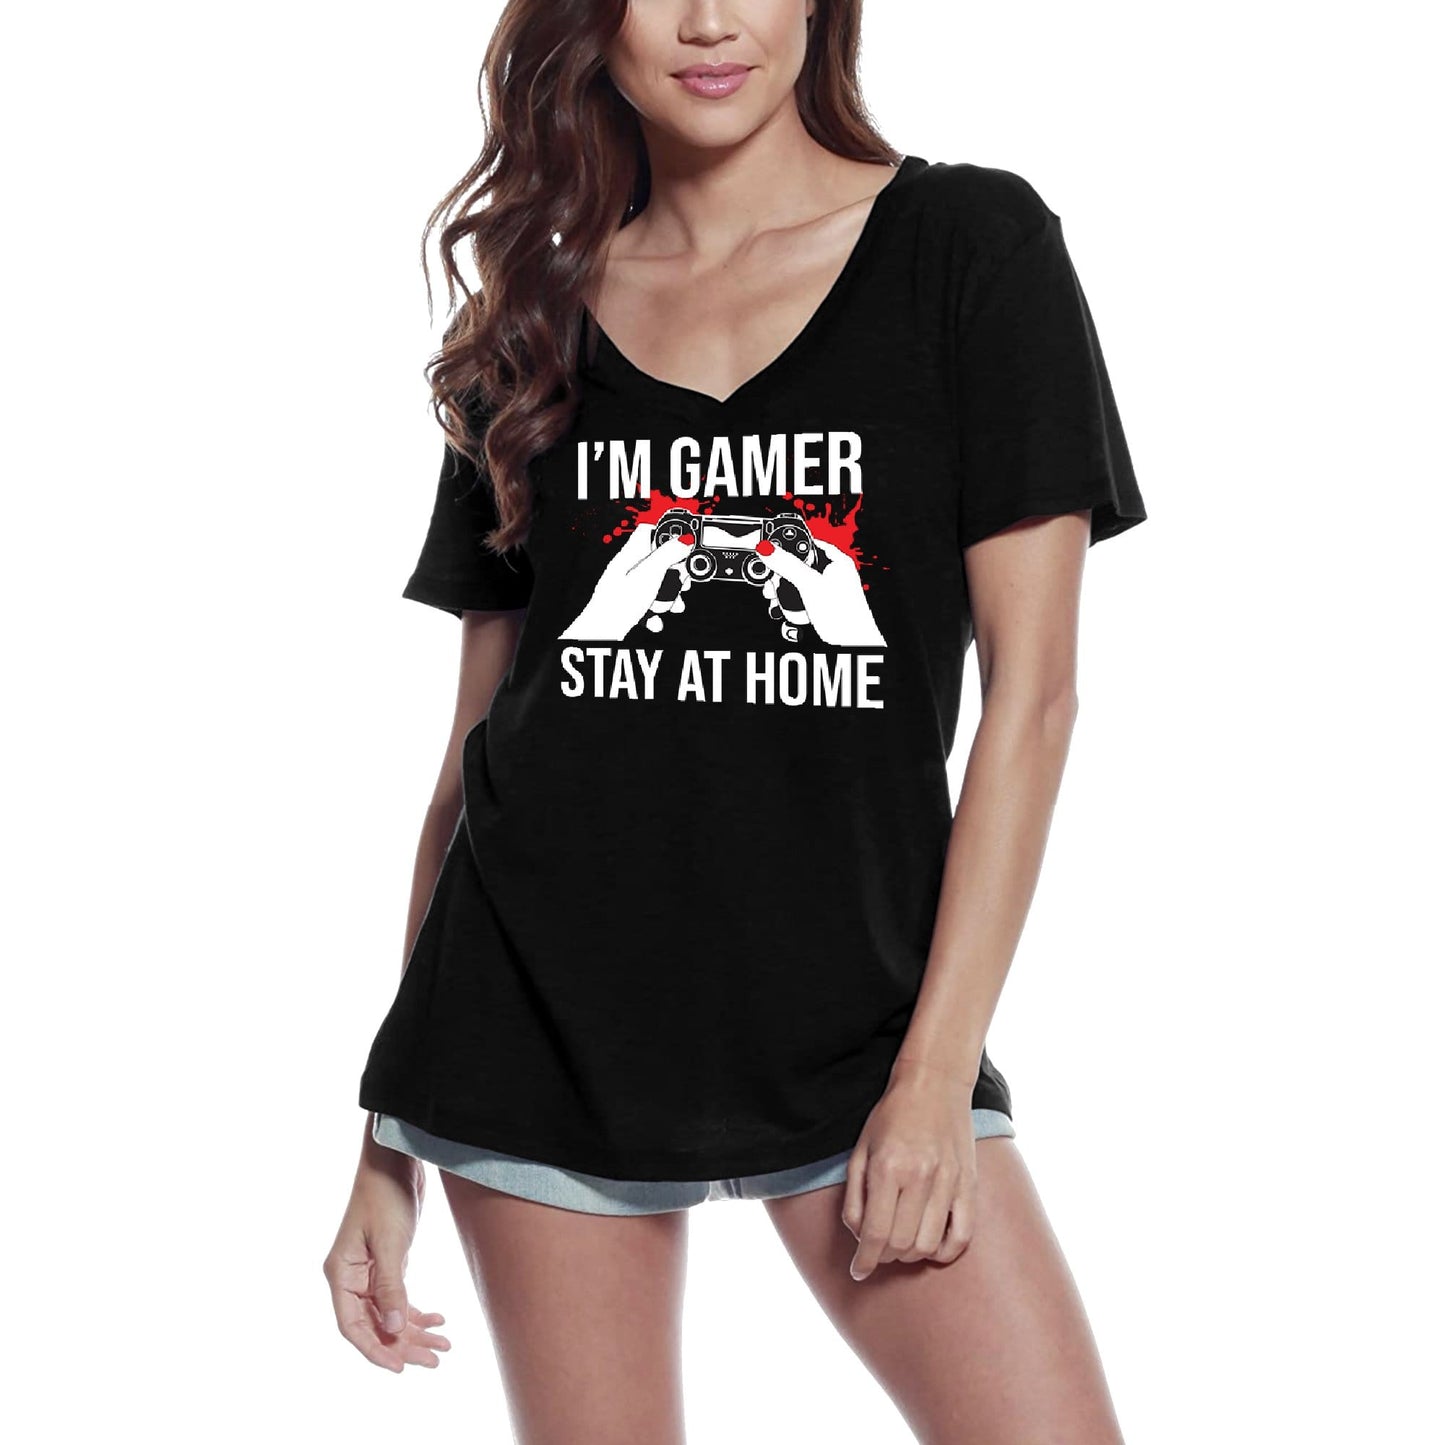 ULTRABASIC Women's Gaming T-Shirt I'm Gamer Stay at Home - Funny Video Game Tee Shirt